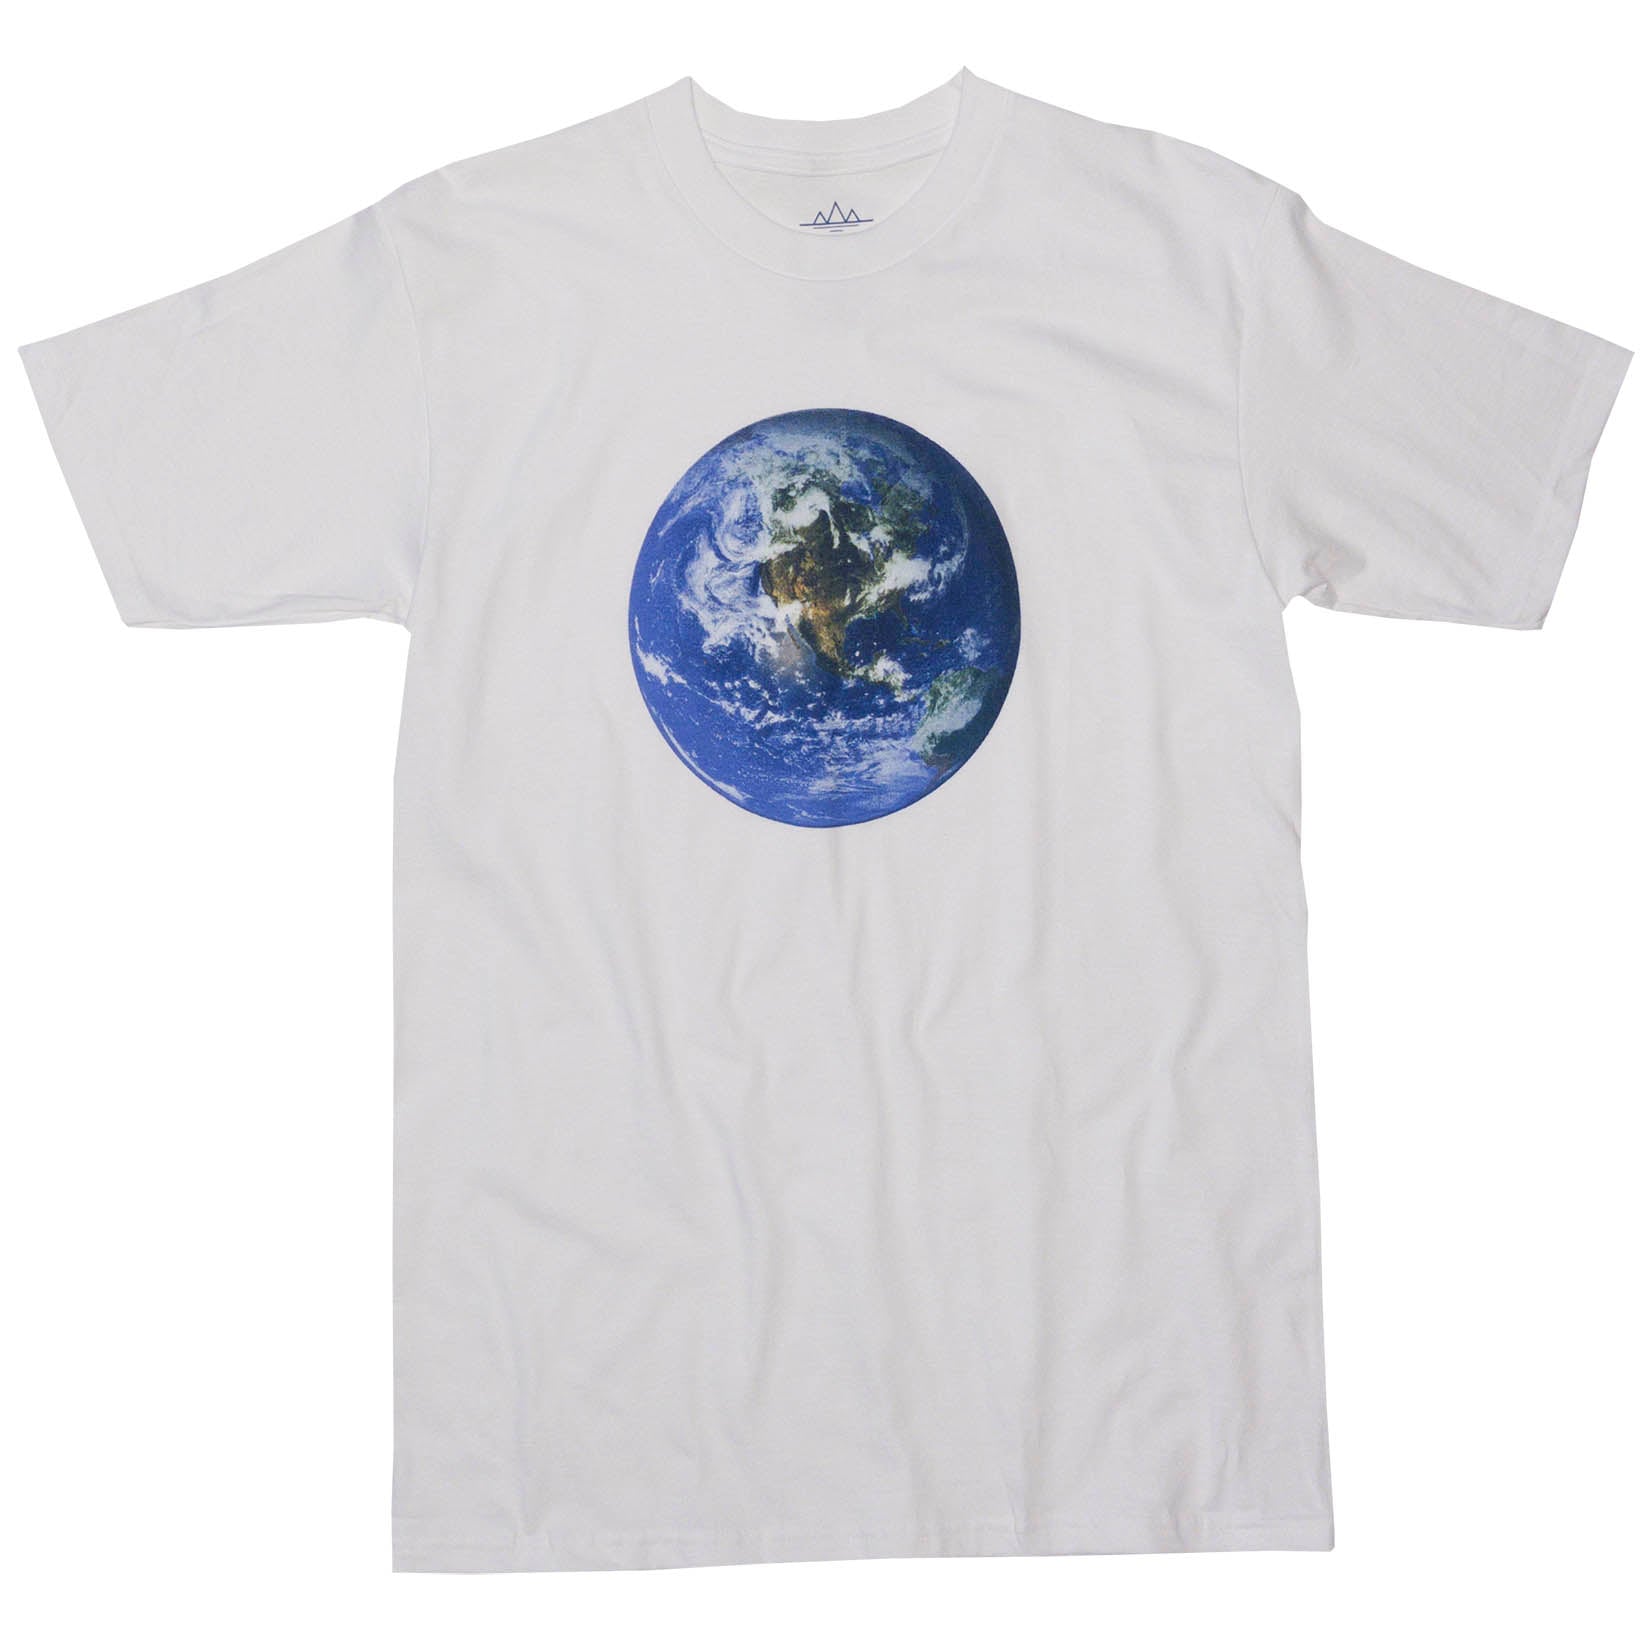 Glorious Earth's Natural Colorful beauty screen printed on a White Graphic Tee